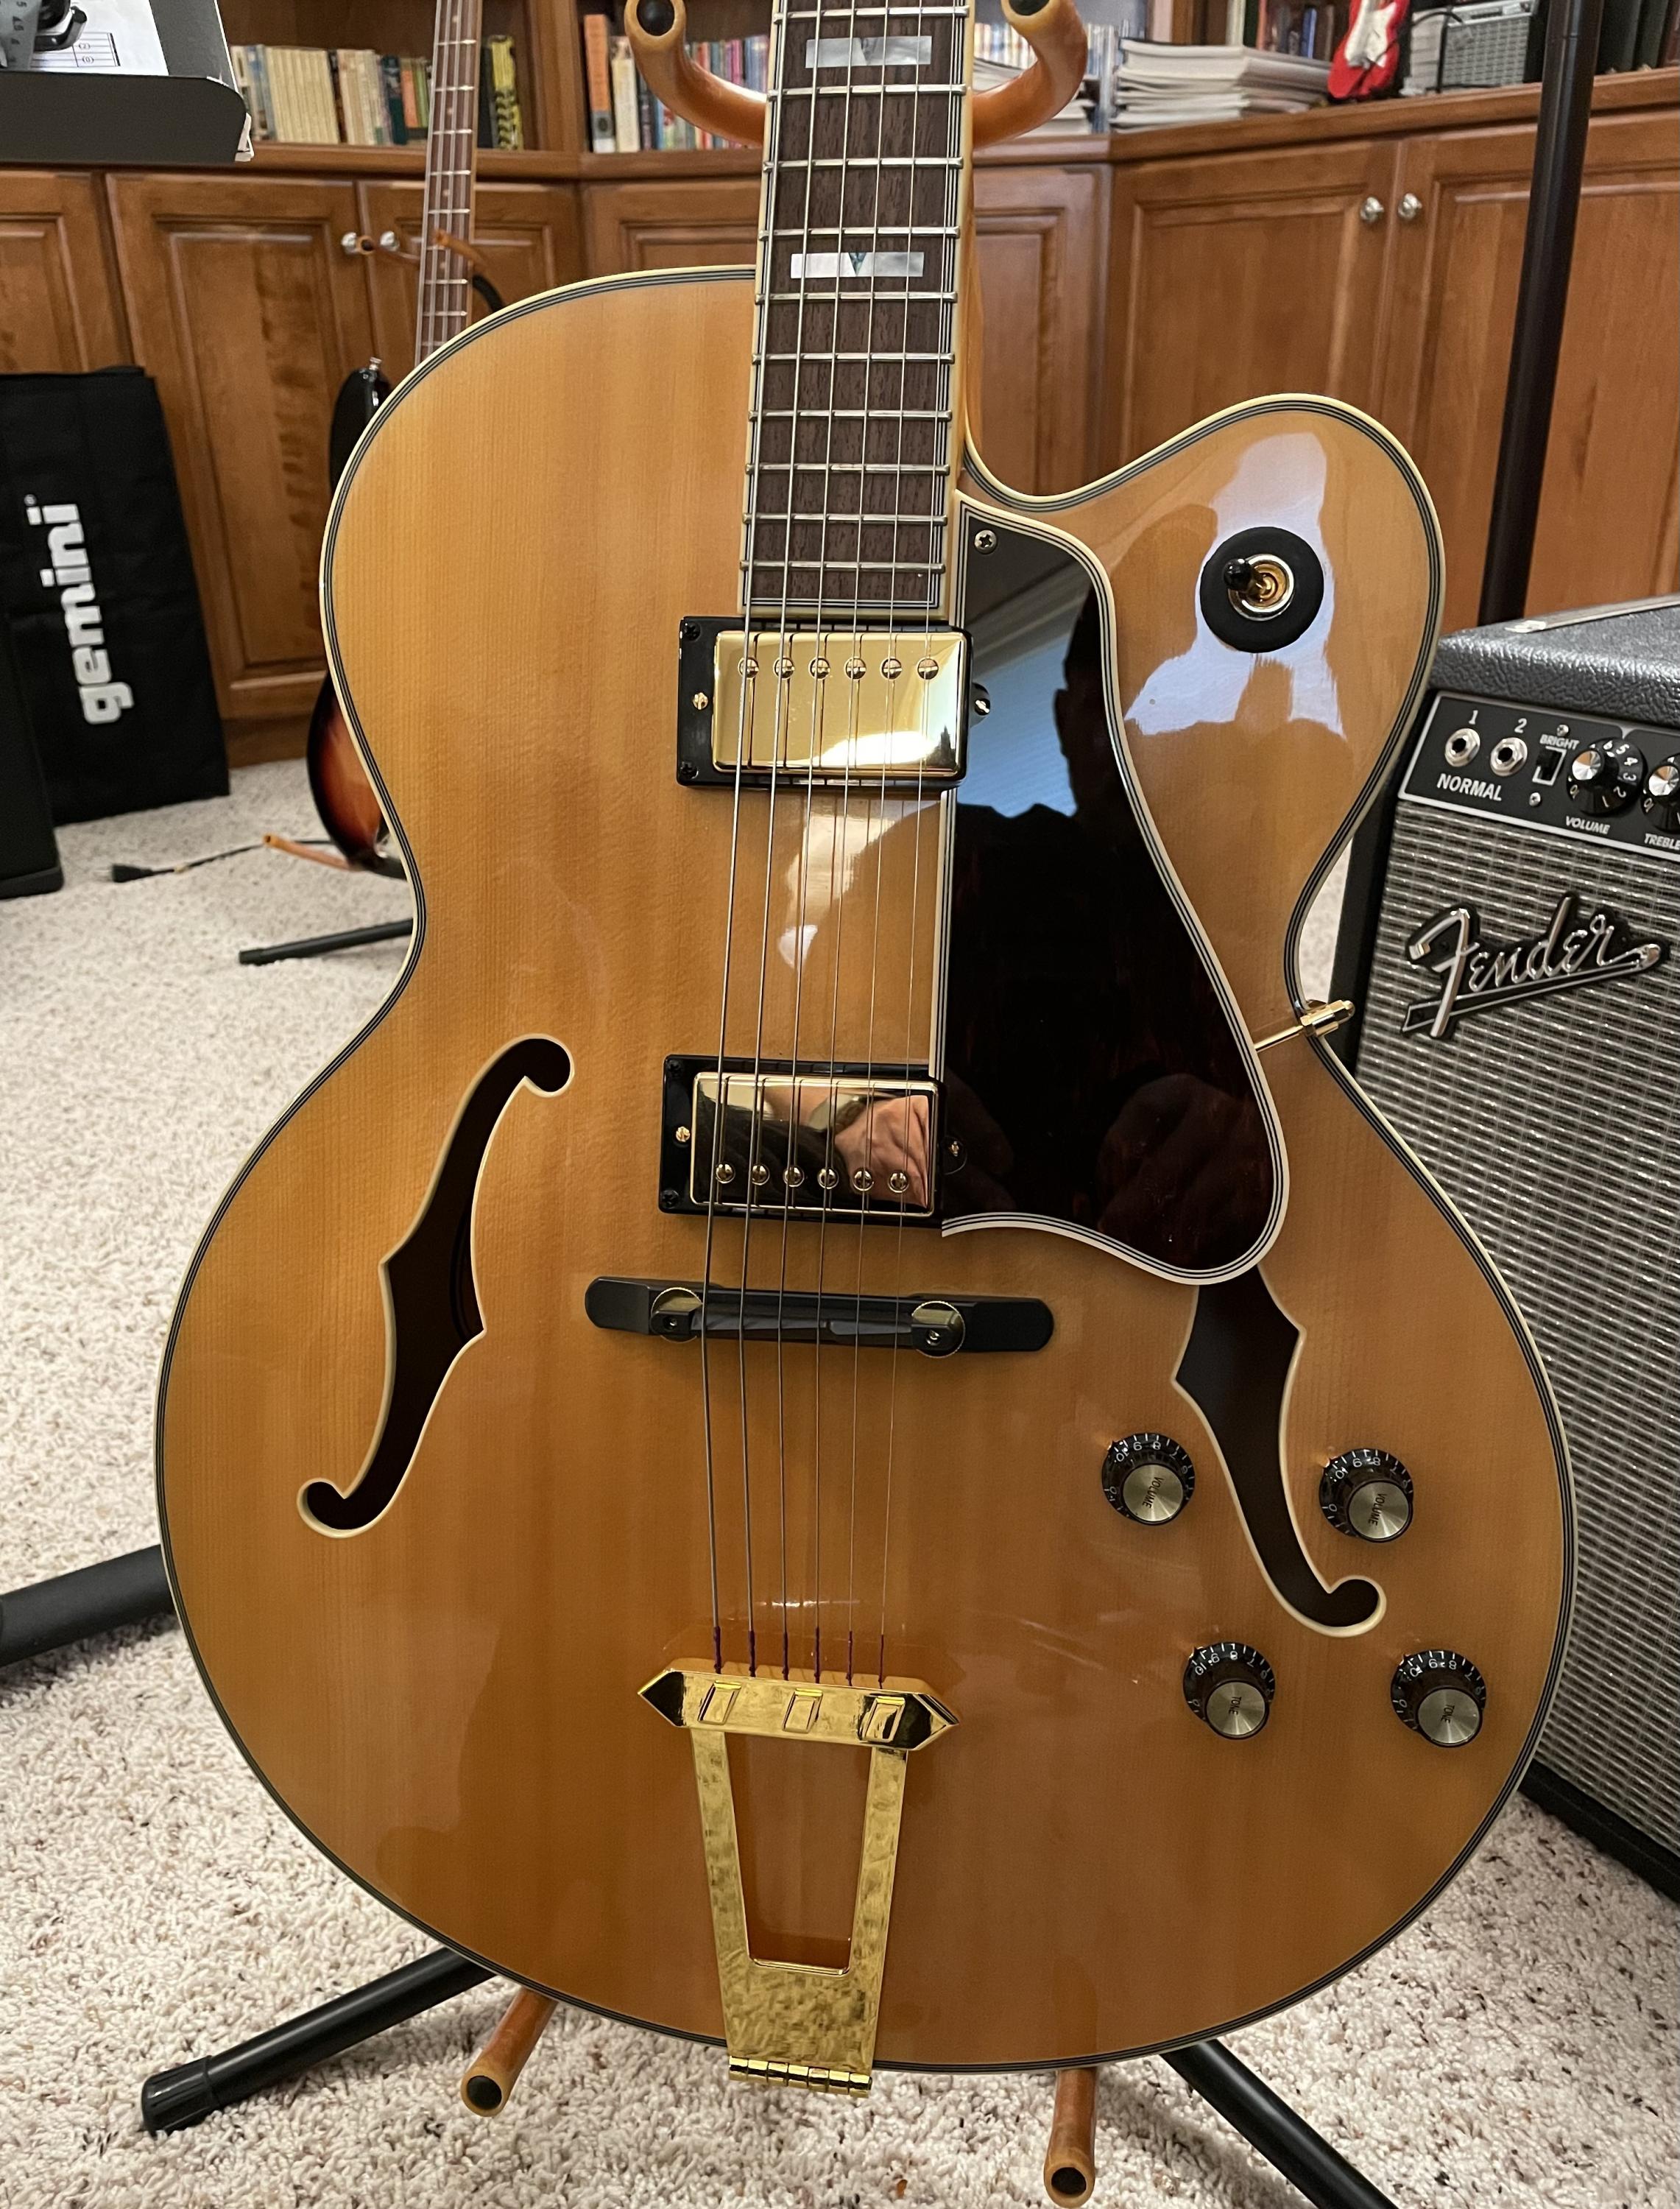 2006 MIK Epiphone Broadway - This is getting to be a problem...-bafe7310-581d-45f5-ba9a-9d7966522714-jpg